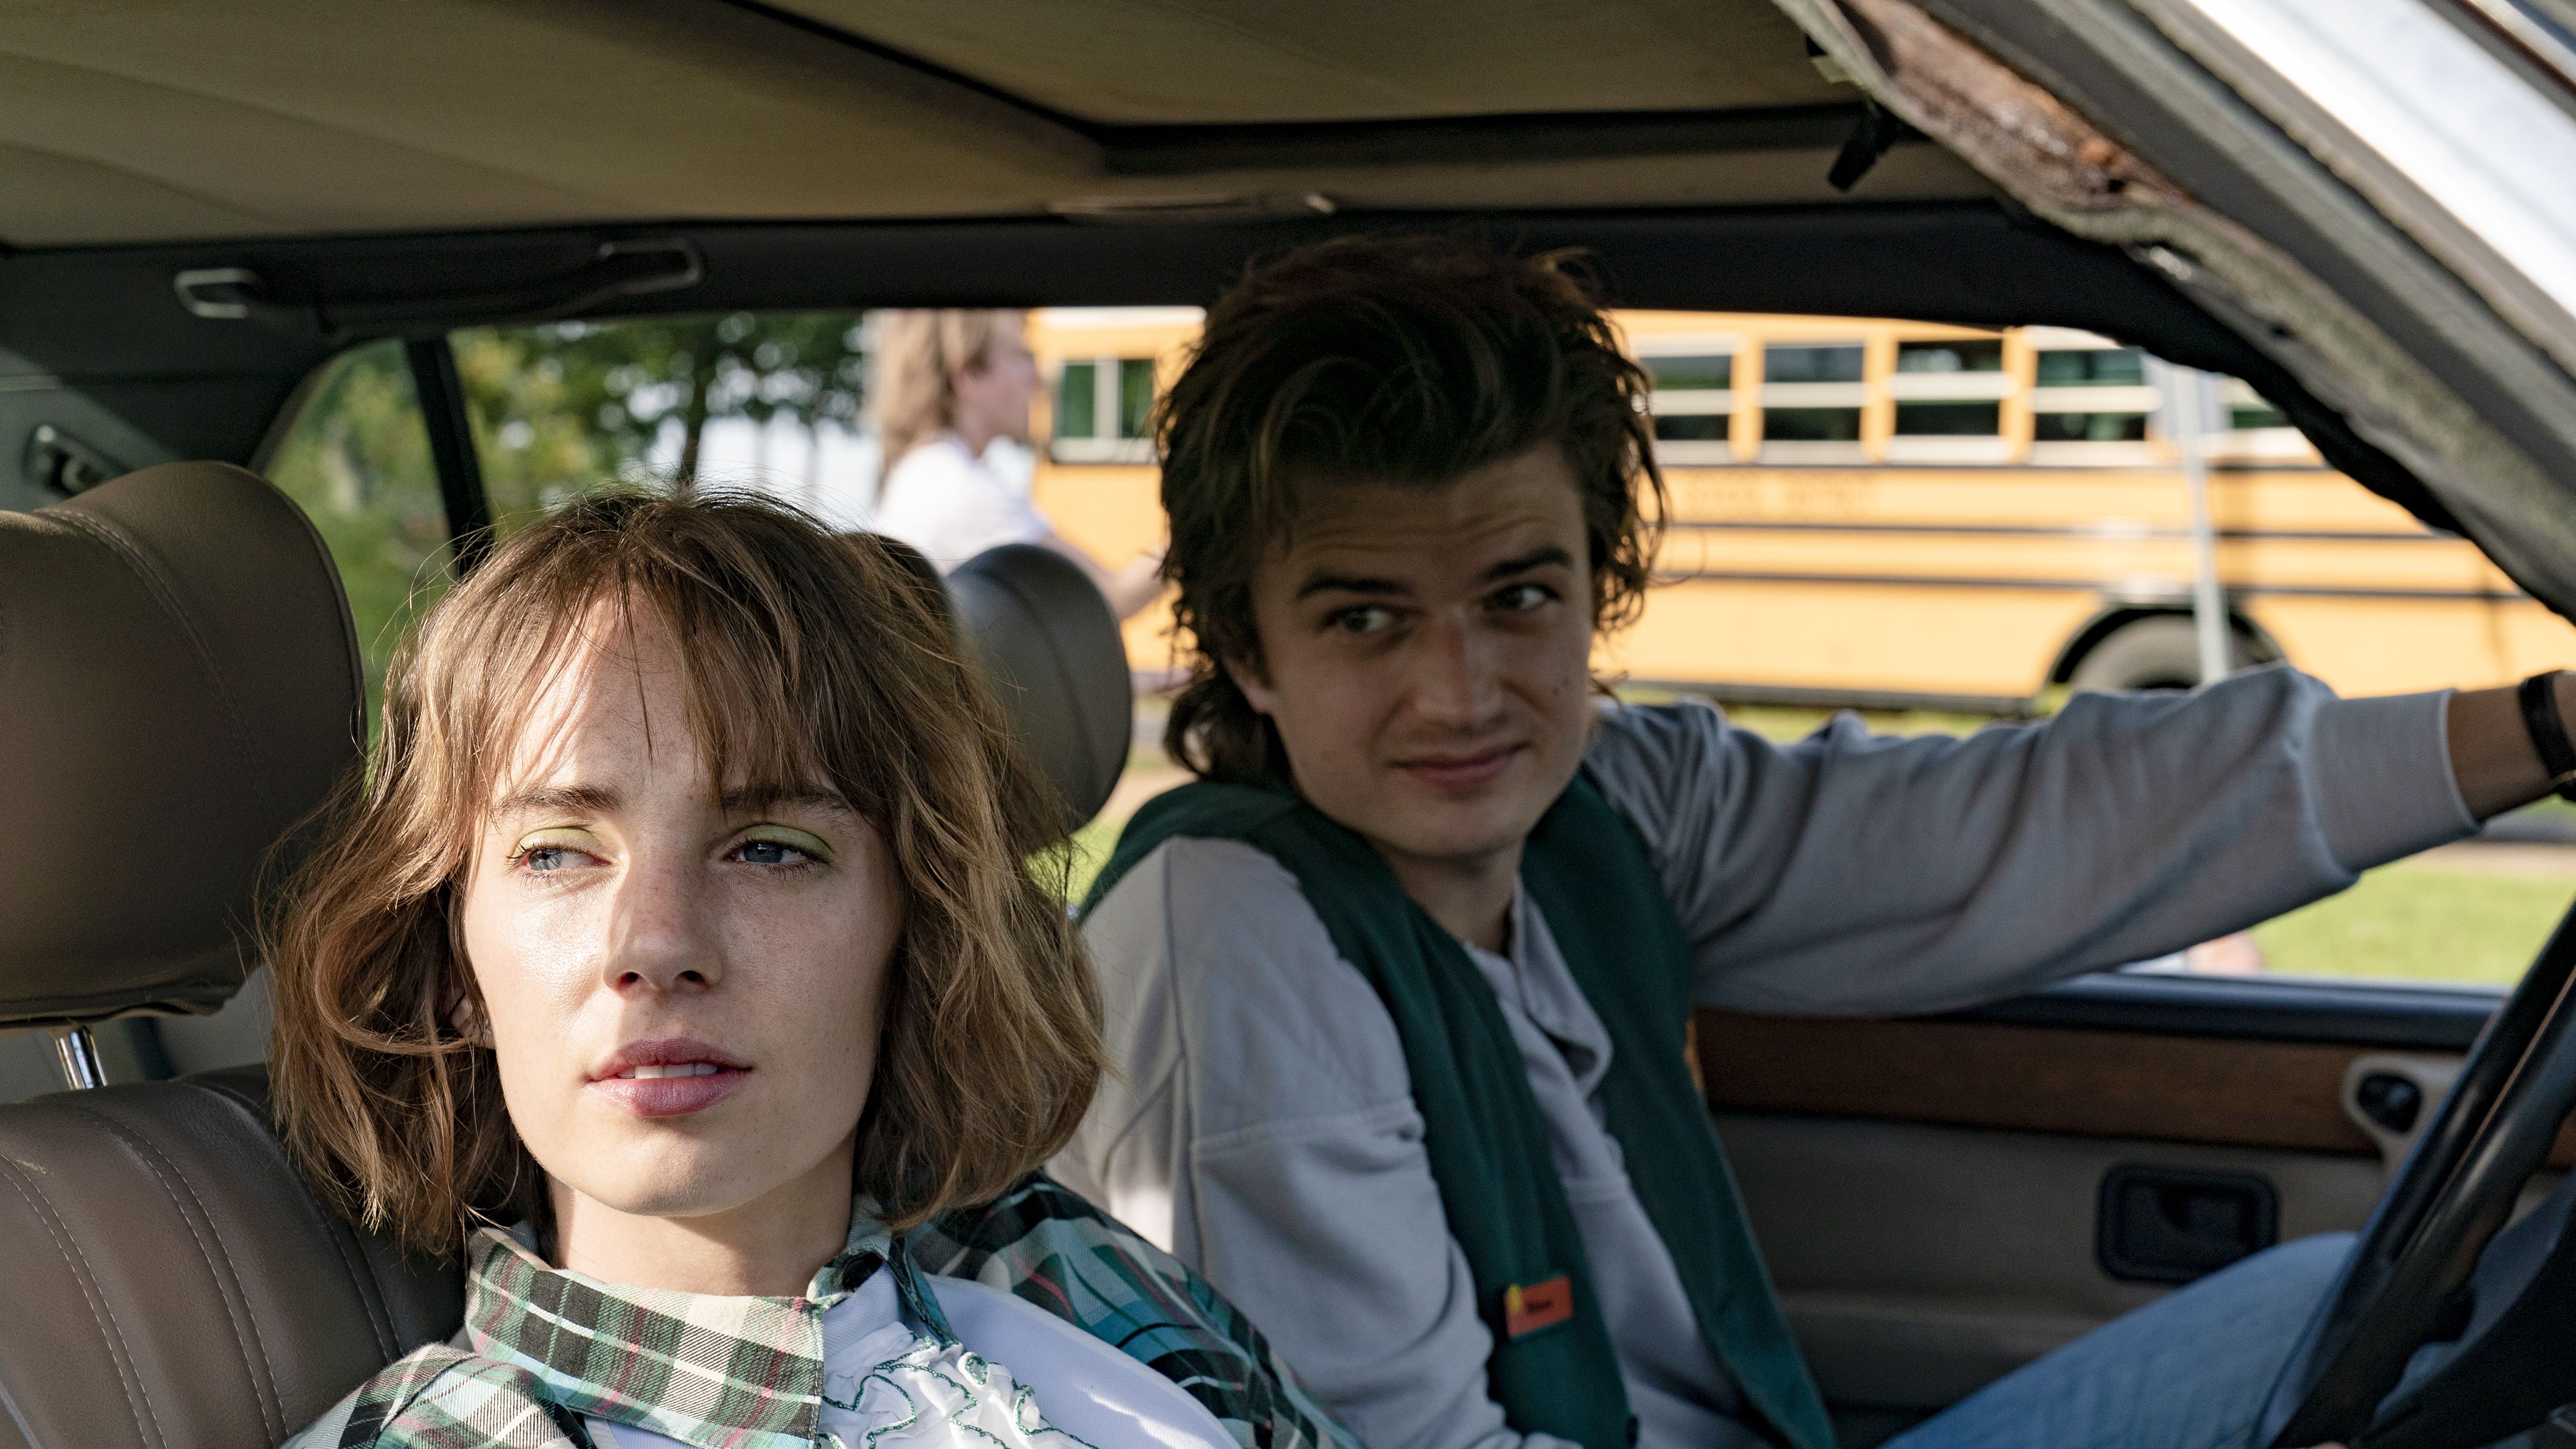 Stranger Things Data Predicts that Will Byers Will Die in Season 5